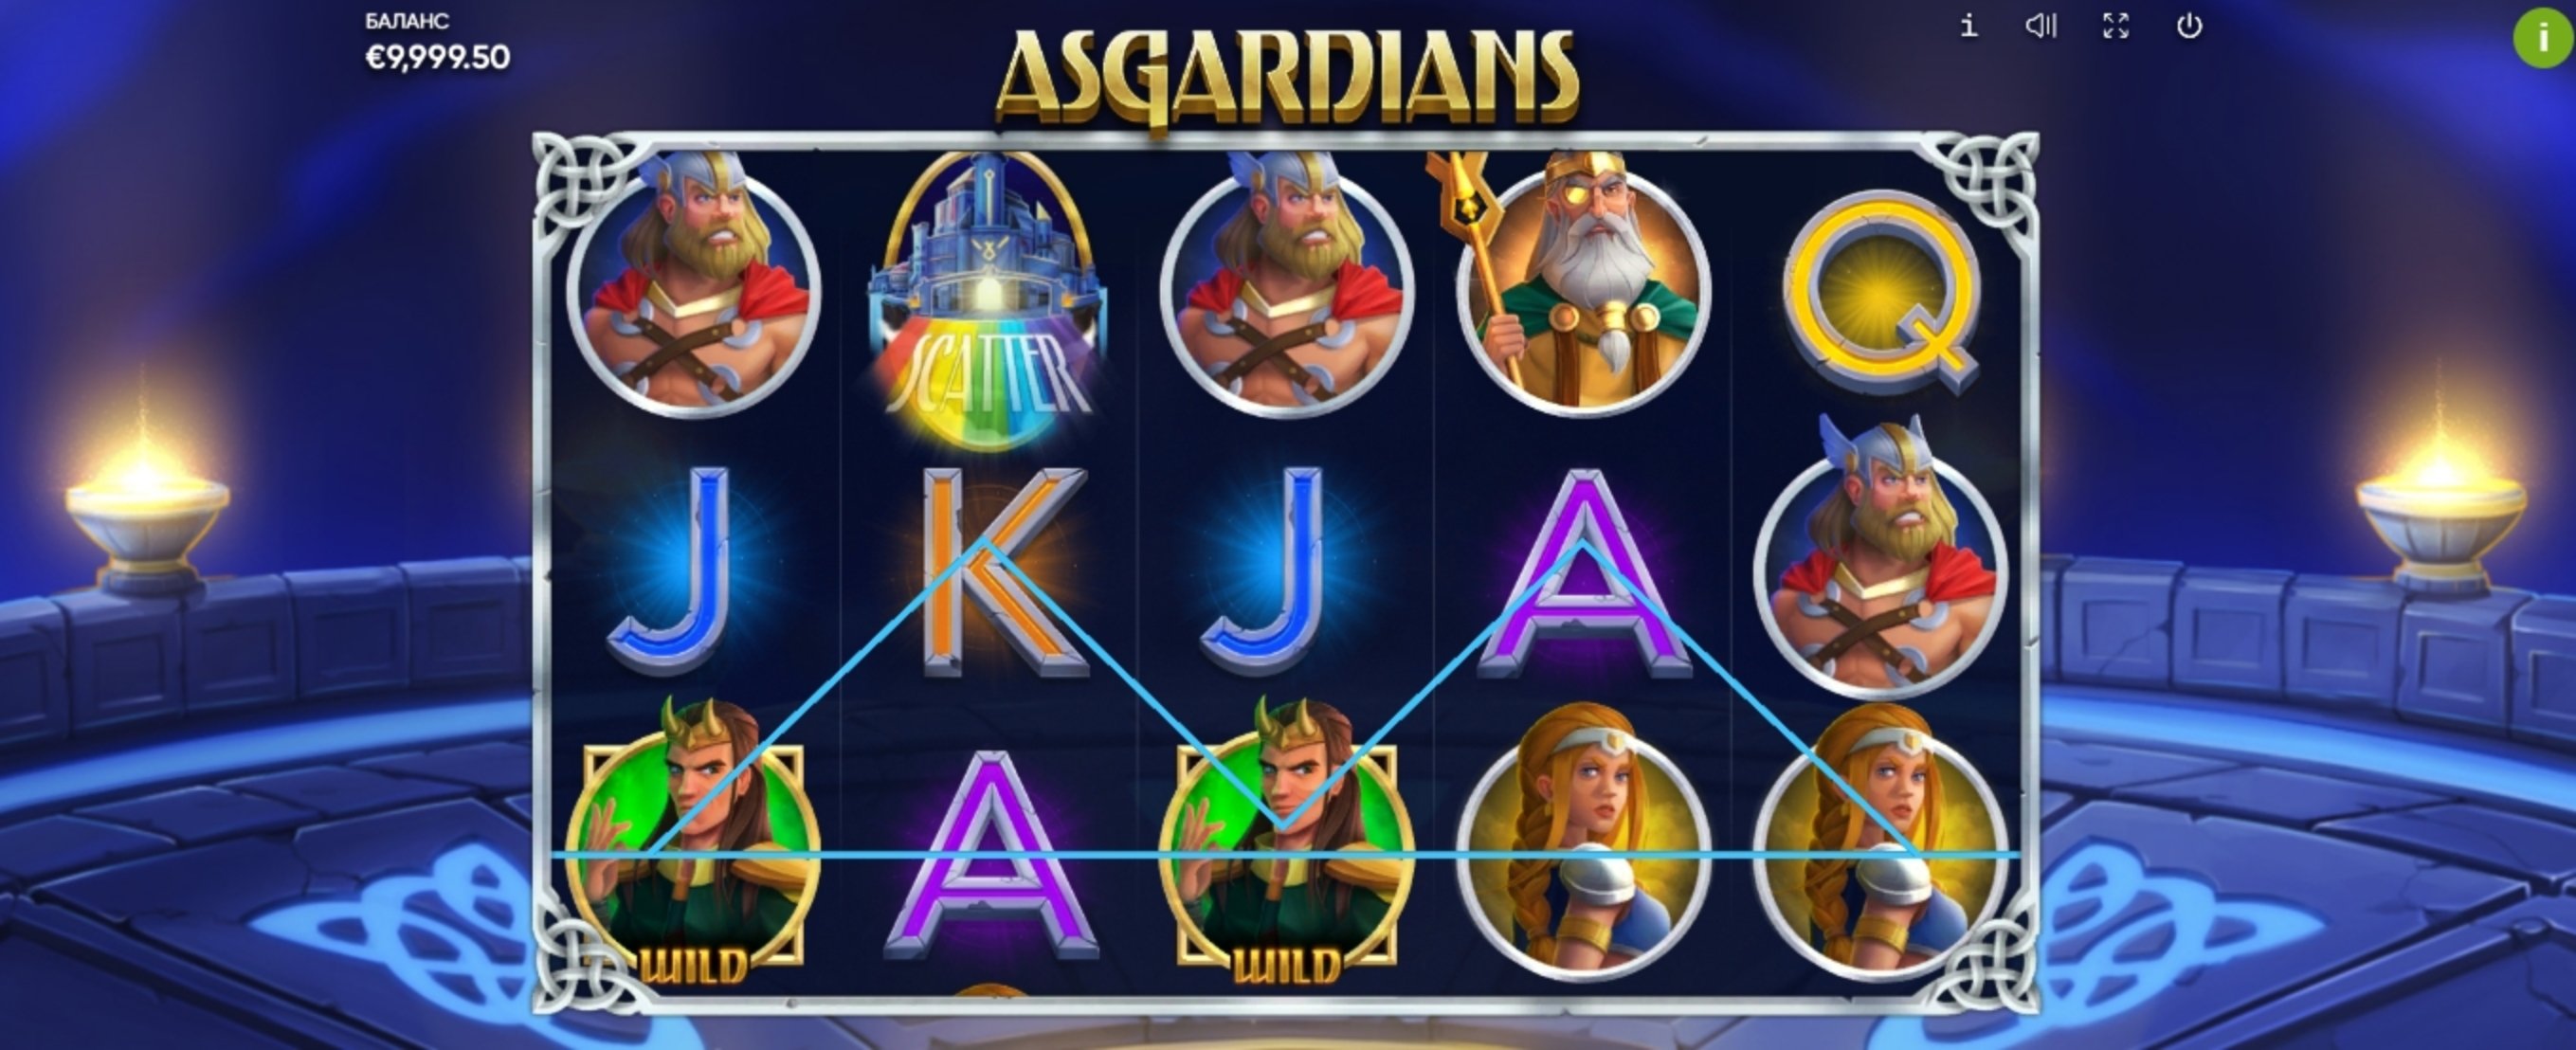 Win Money in Asgardians Free Slot Game by Endorphina